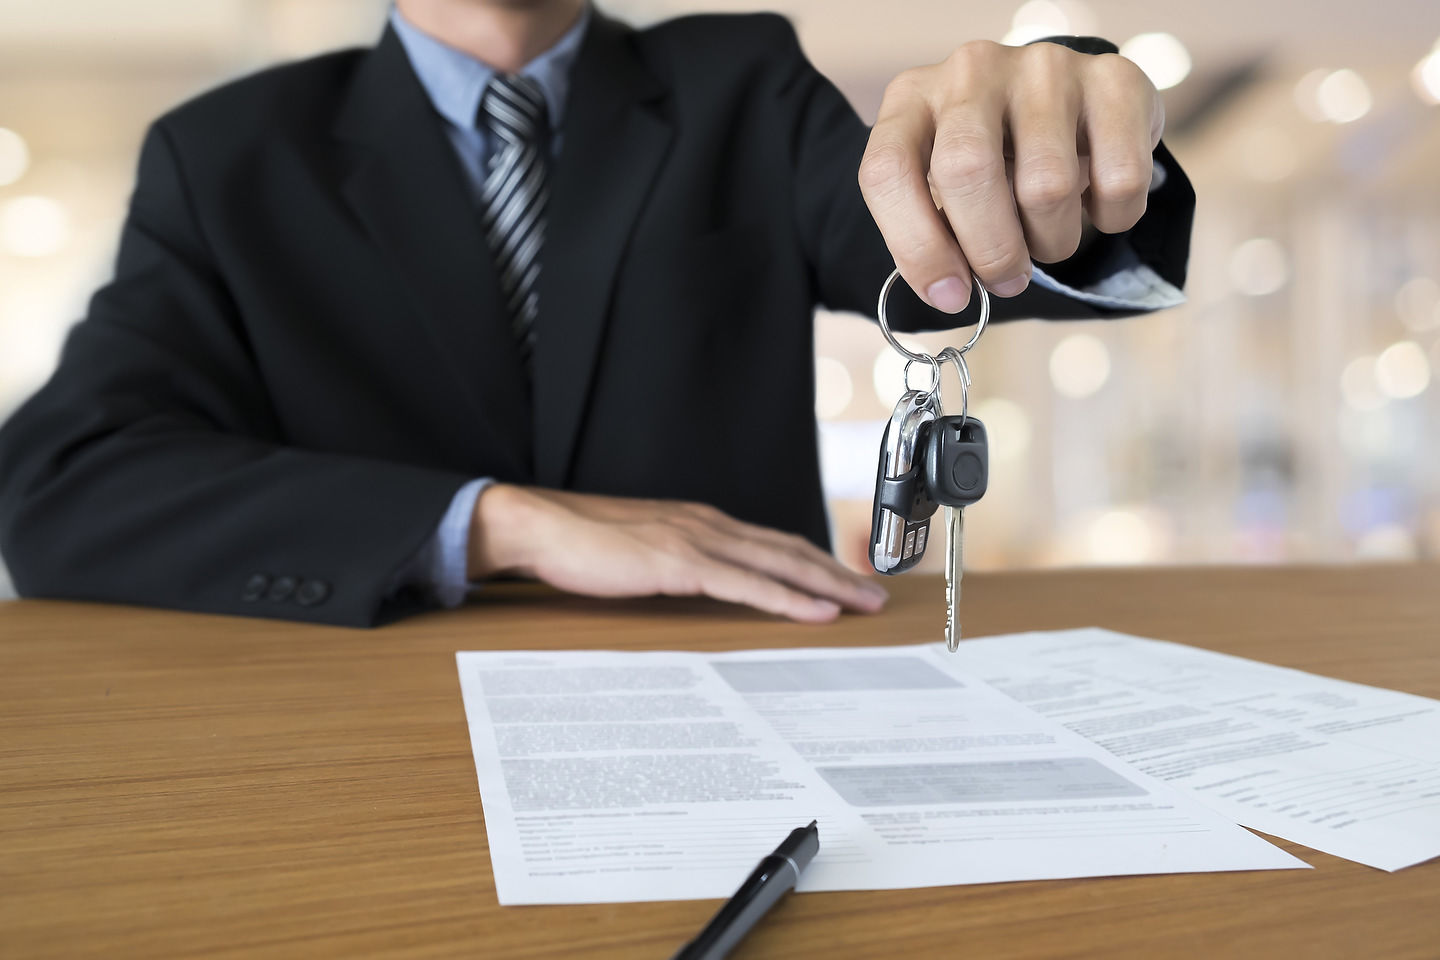 Understanding the tax advantages of trading in your vehicle